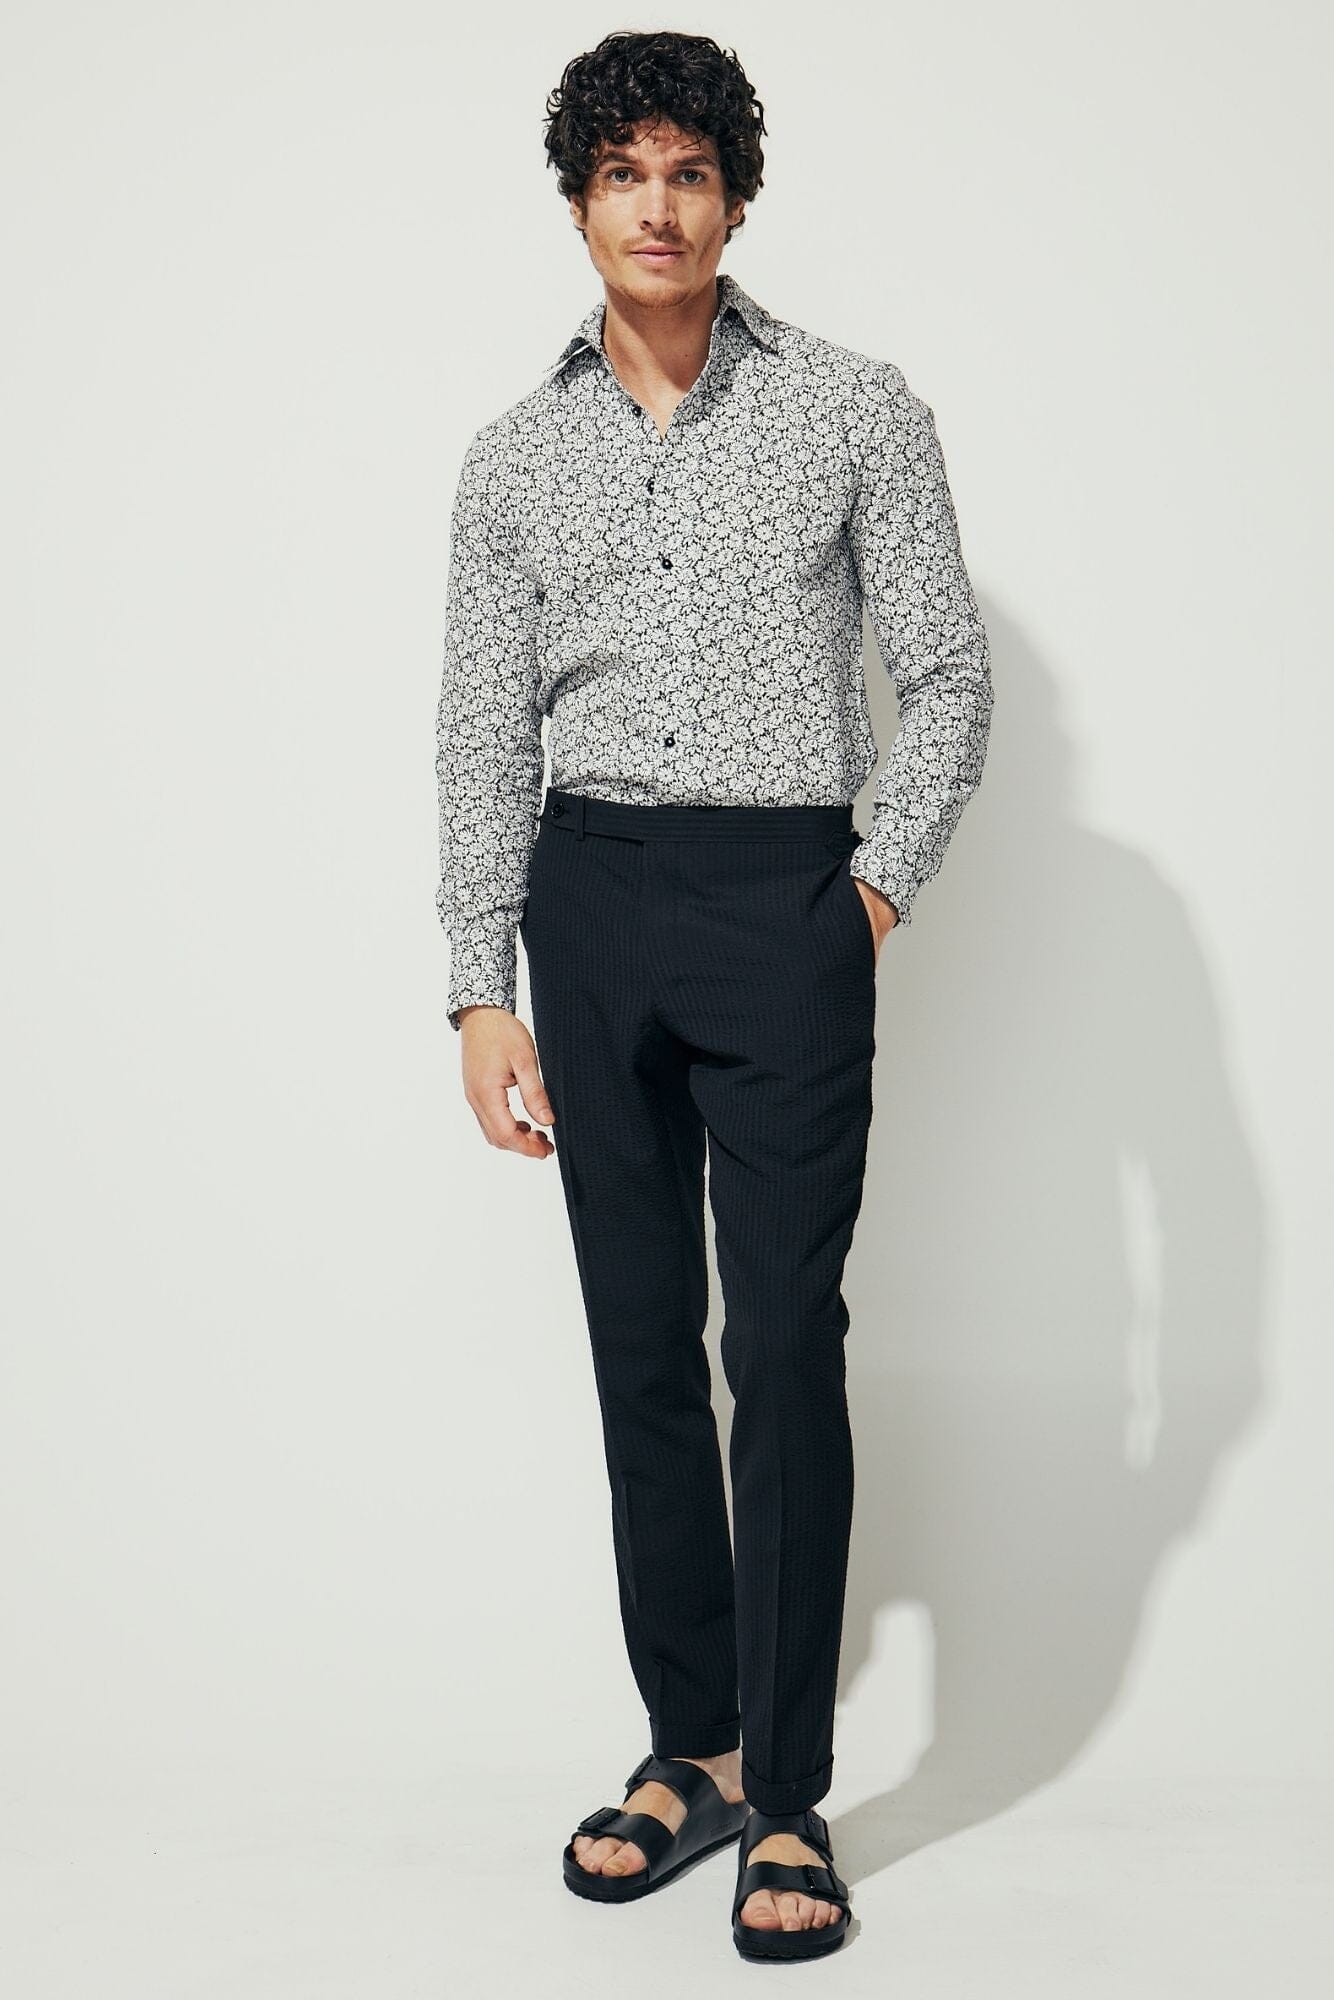 Cooper Super Lux Shirt - Black and White Floral Crinkle Print